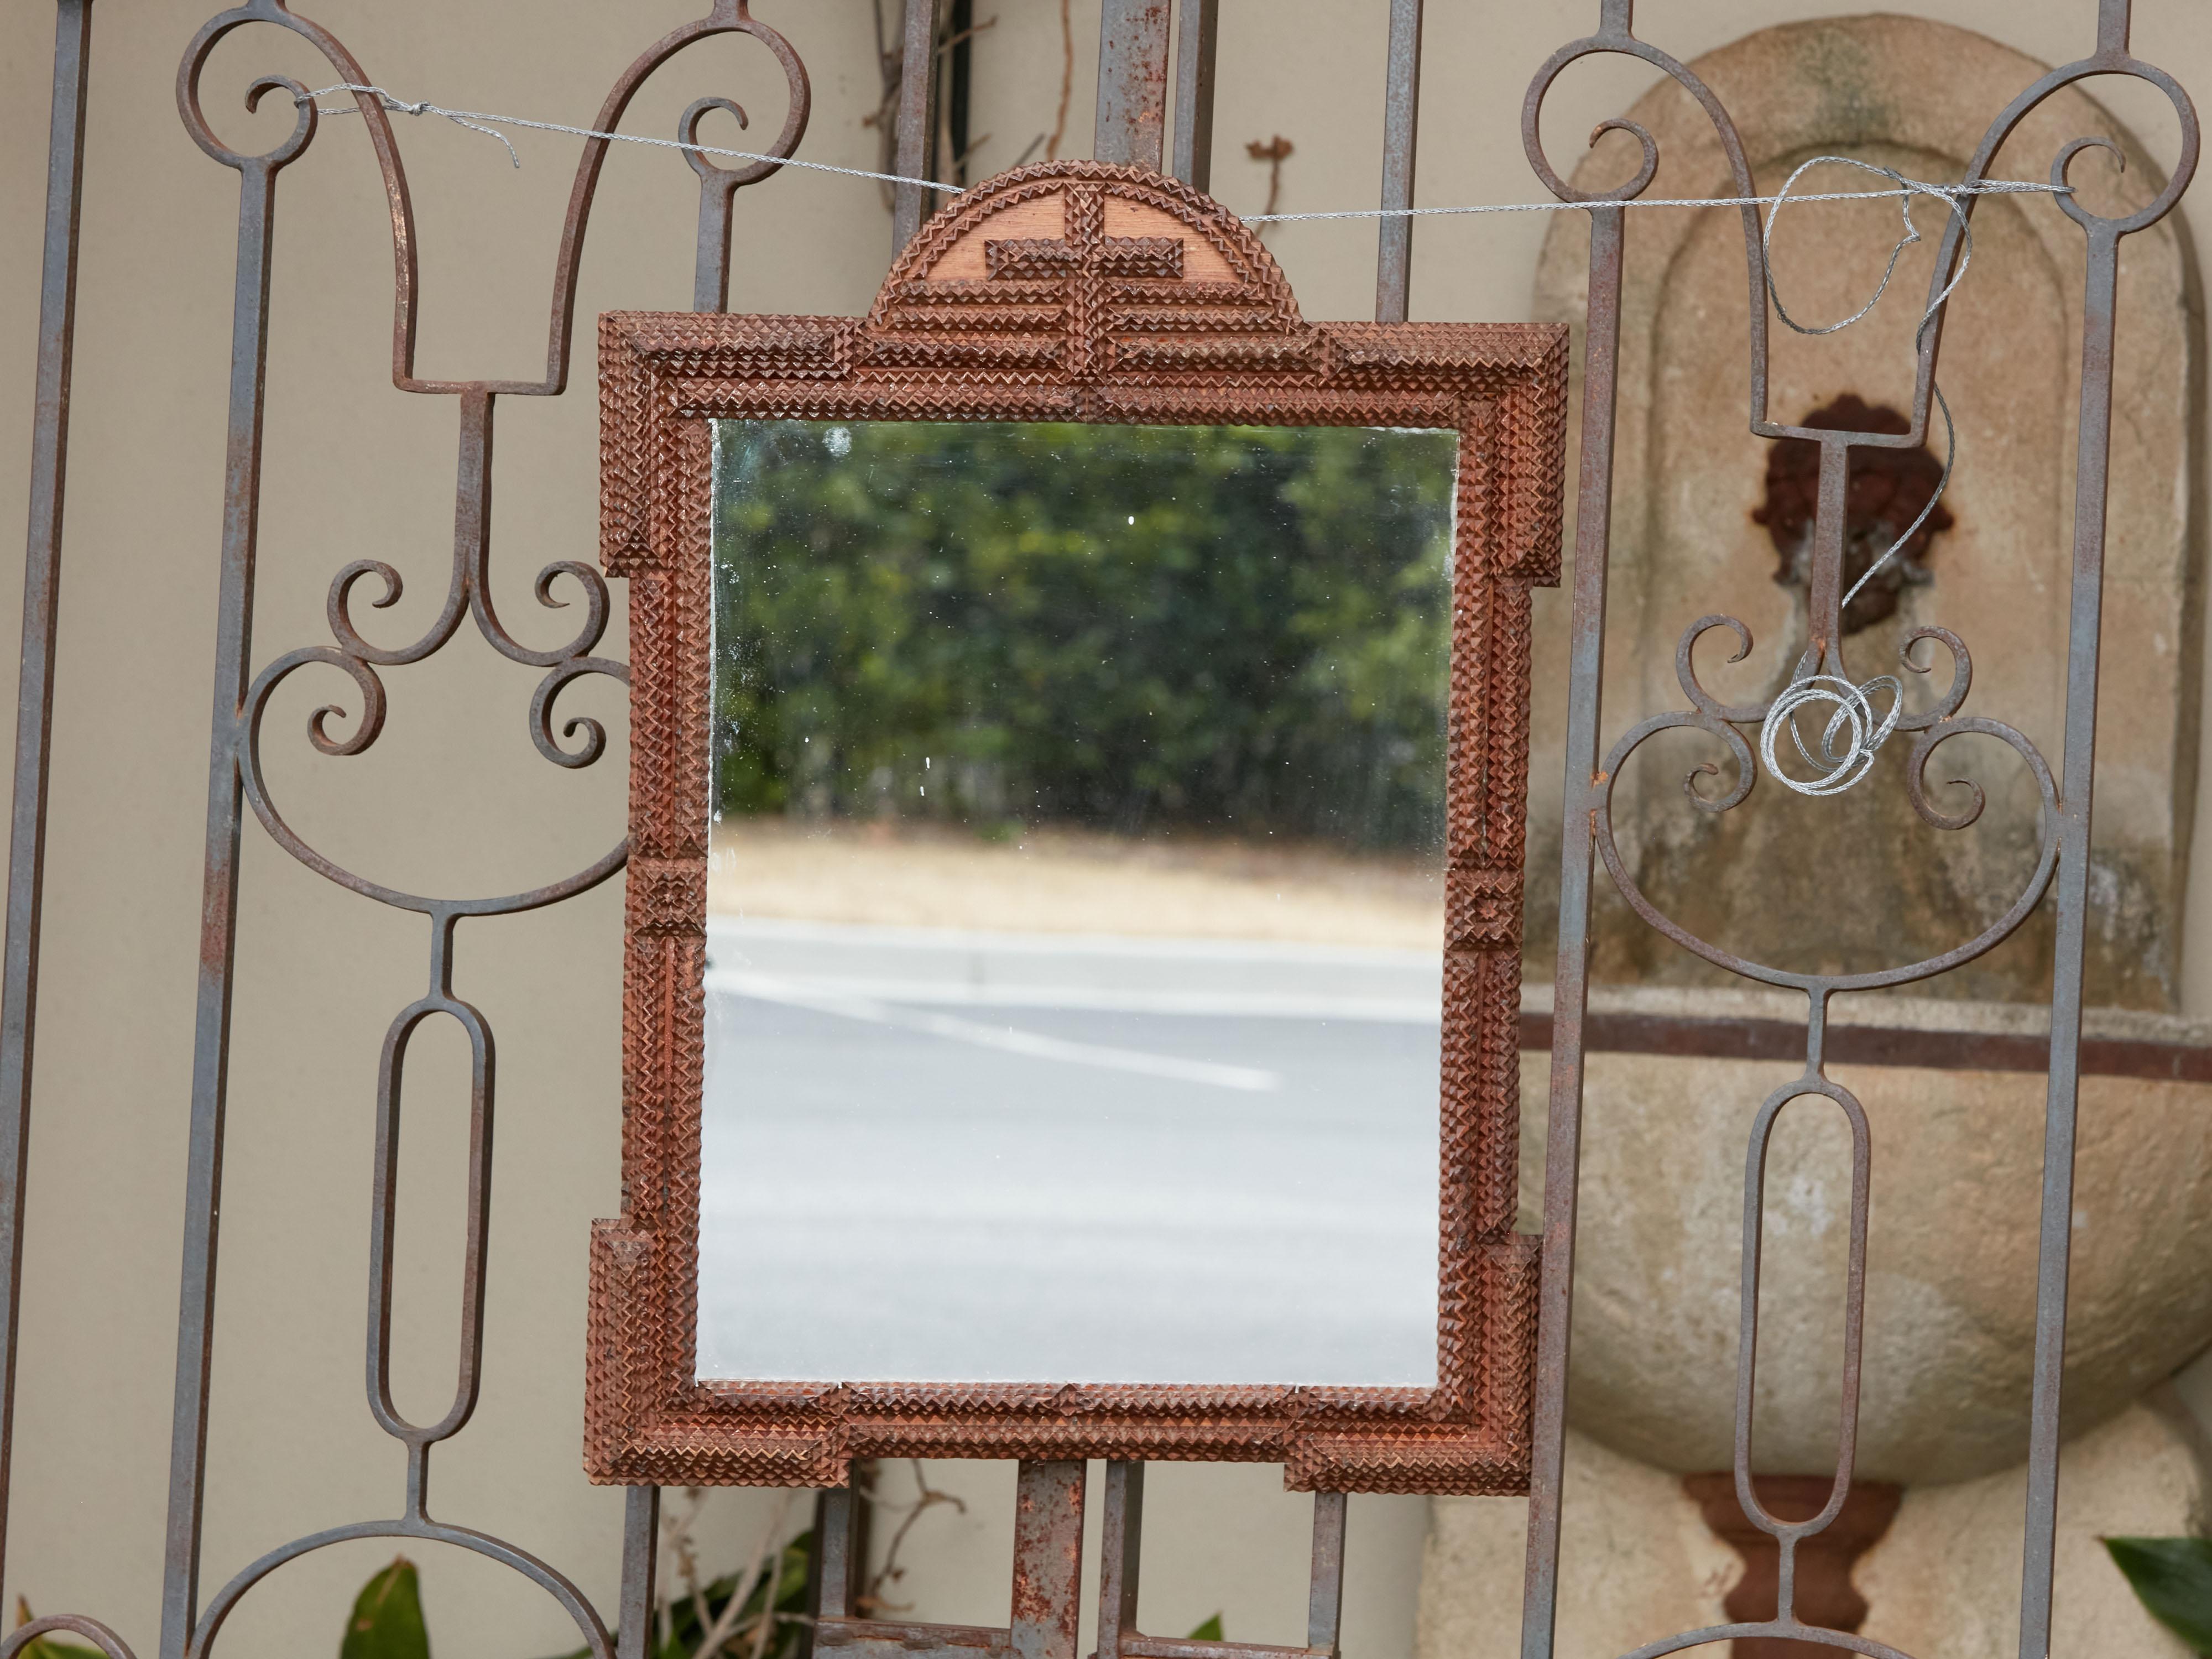 A French Turn of the century Tramp Art hand-carved mirror from the early 20th century, with arching crest, cross motif, protruding corners and brown patina. Created in France during the Turn of the Century which saw the transition between the 19th